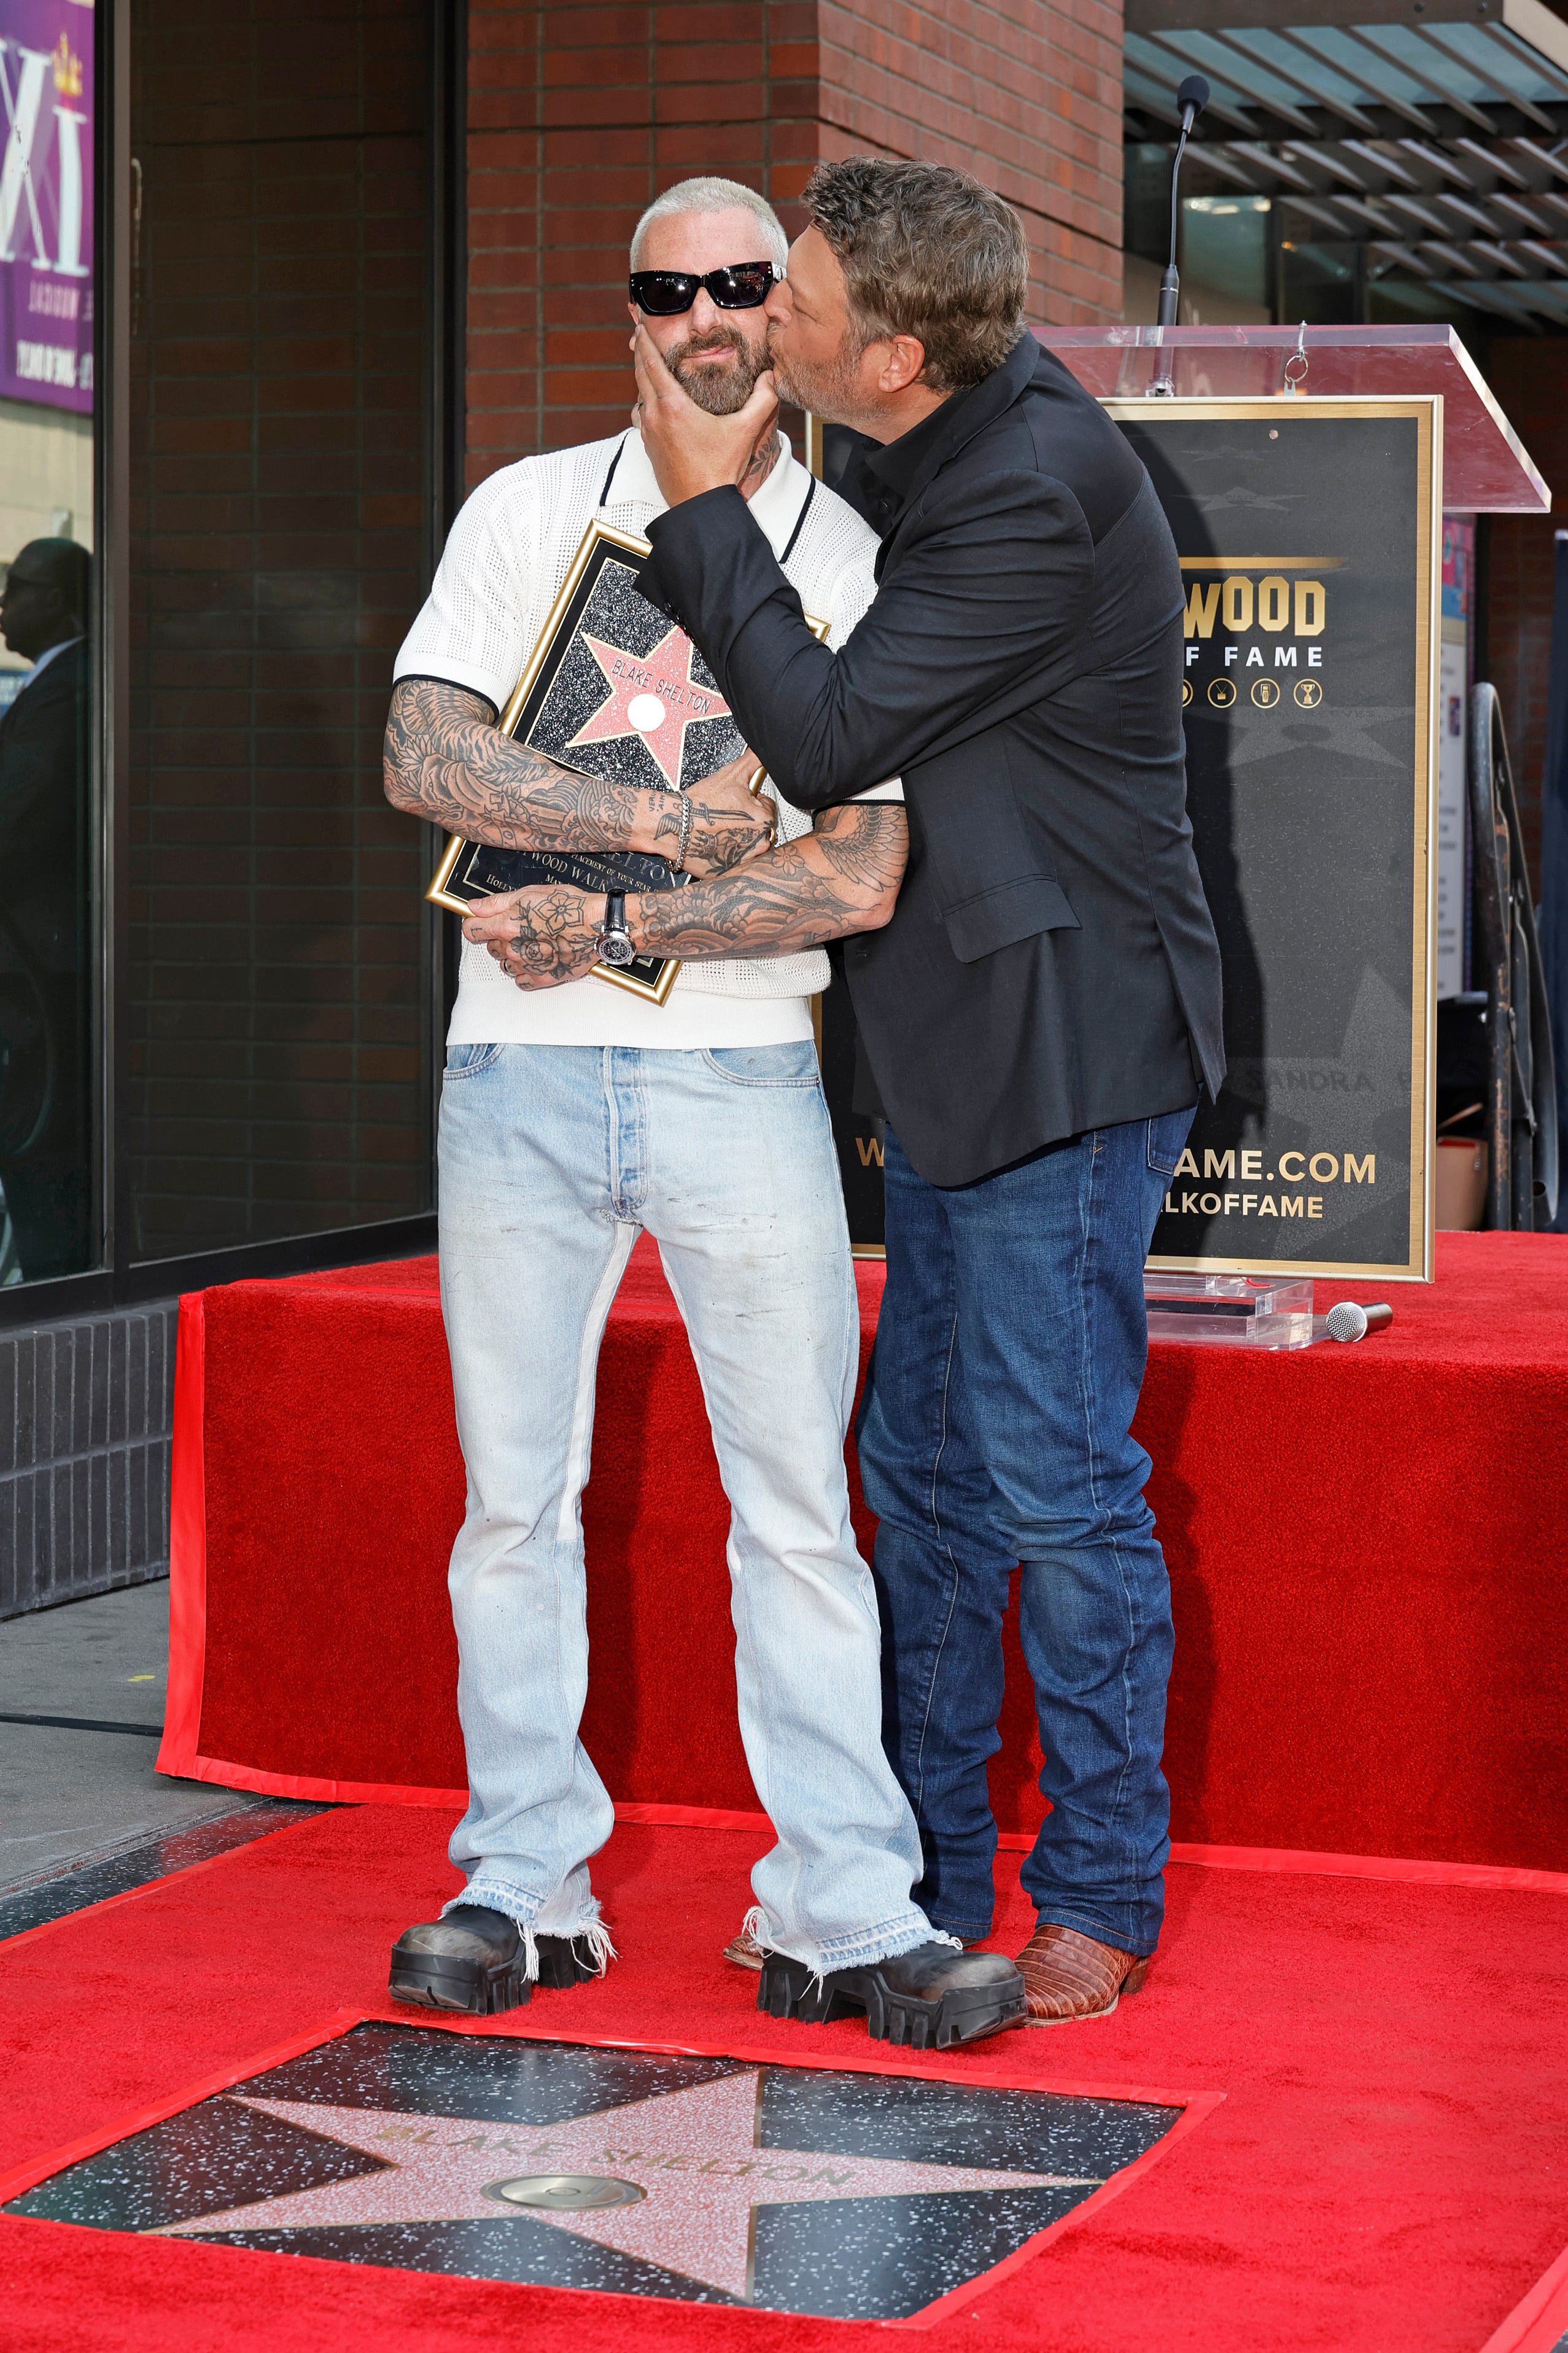 Shelton planted a big fat kiss on his former "The Voice" companion Adam Levine's cheek for a funny moment during the day.